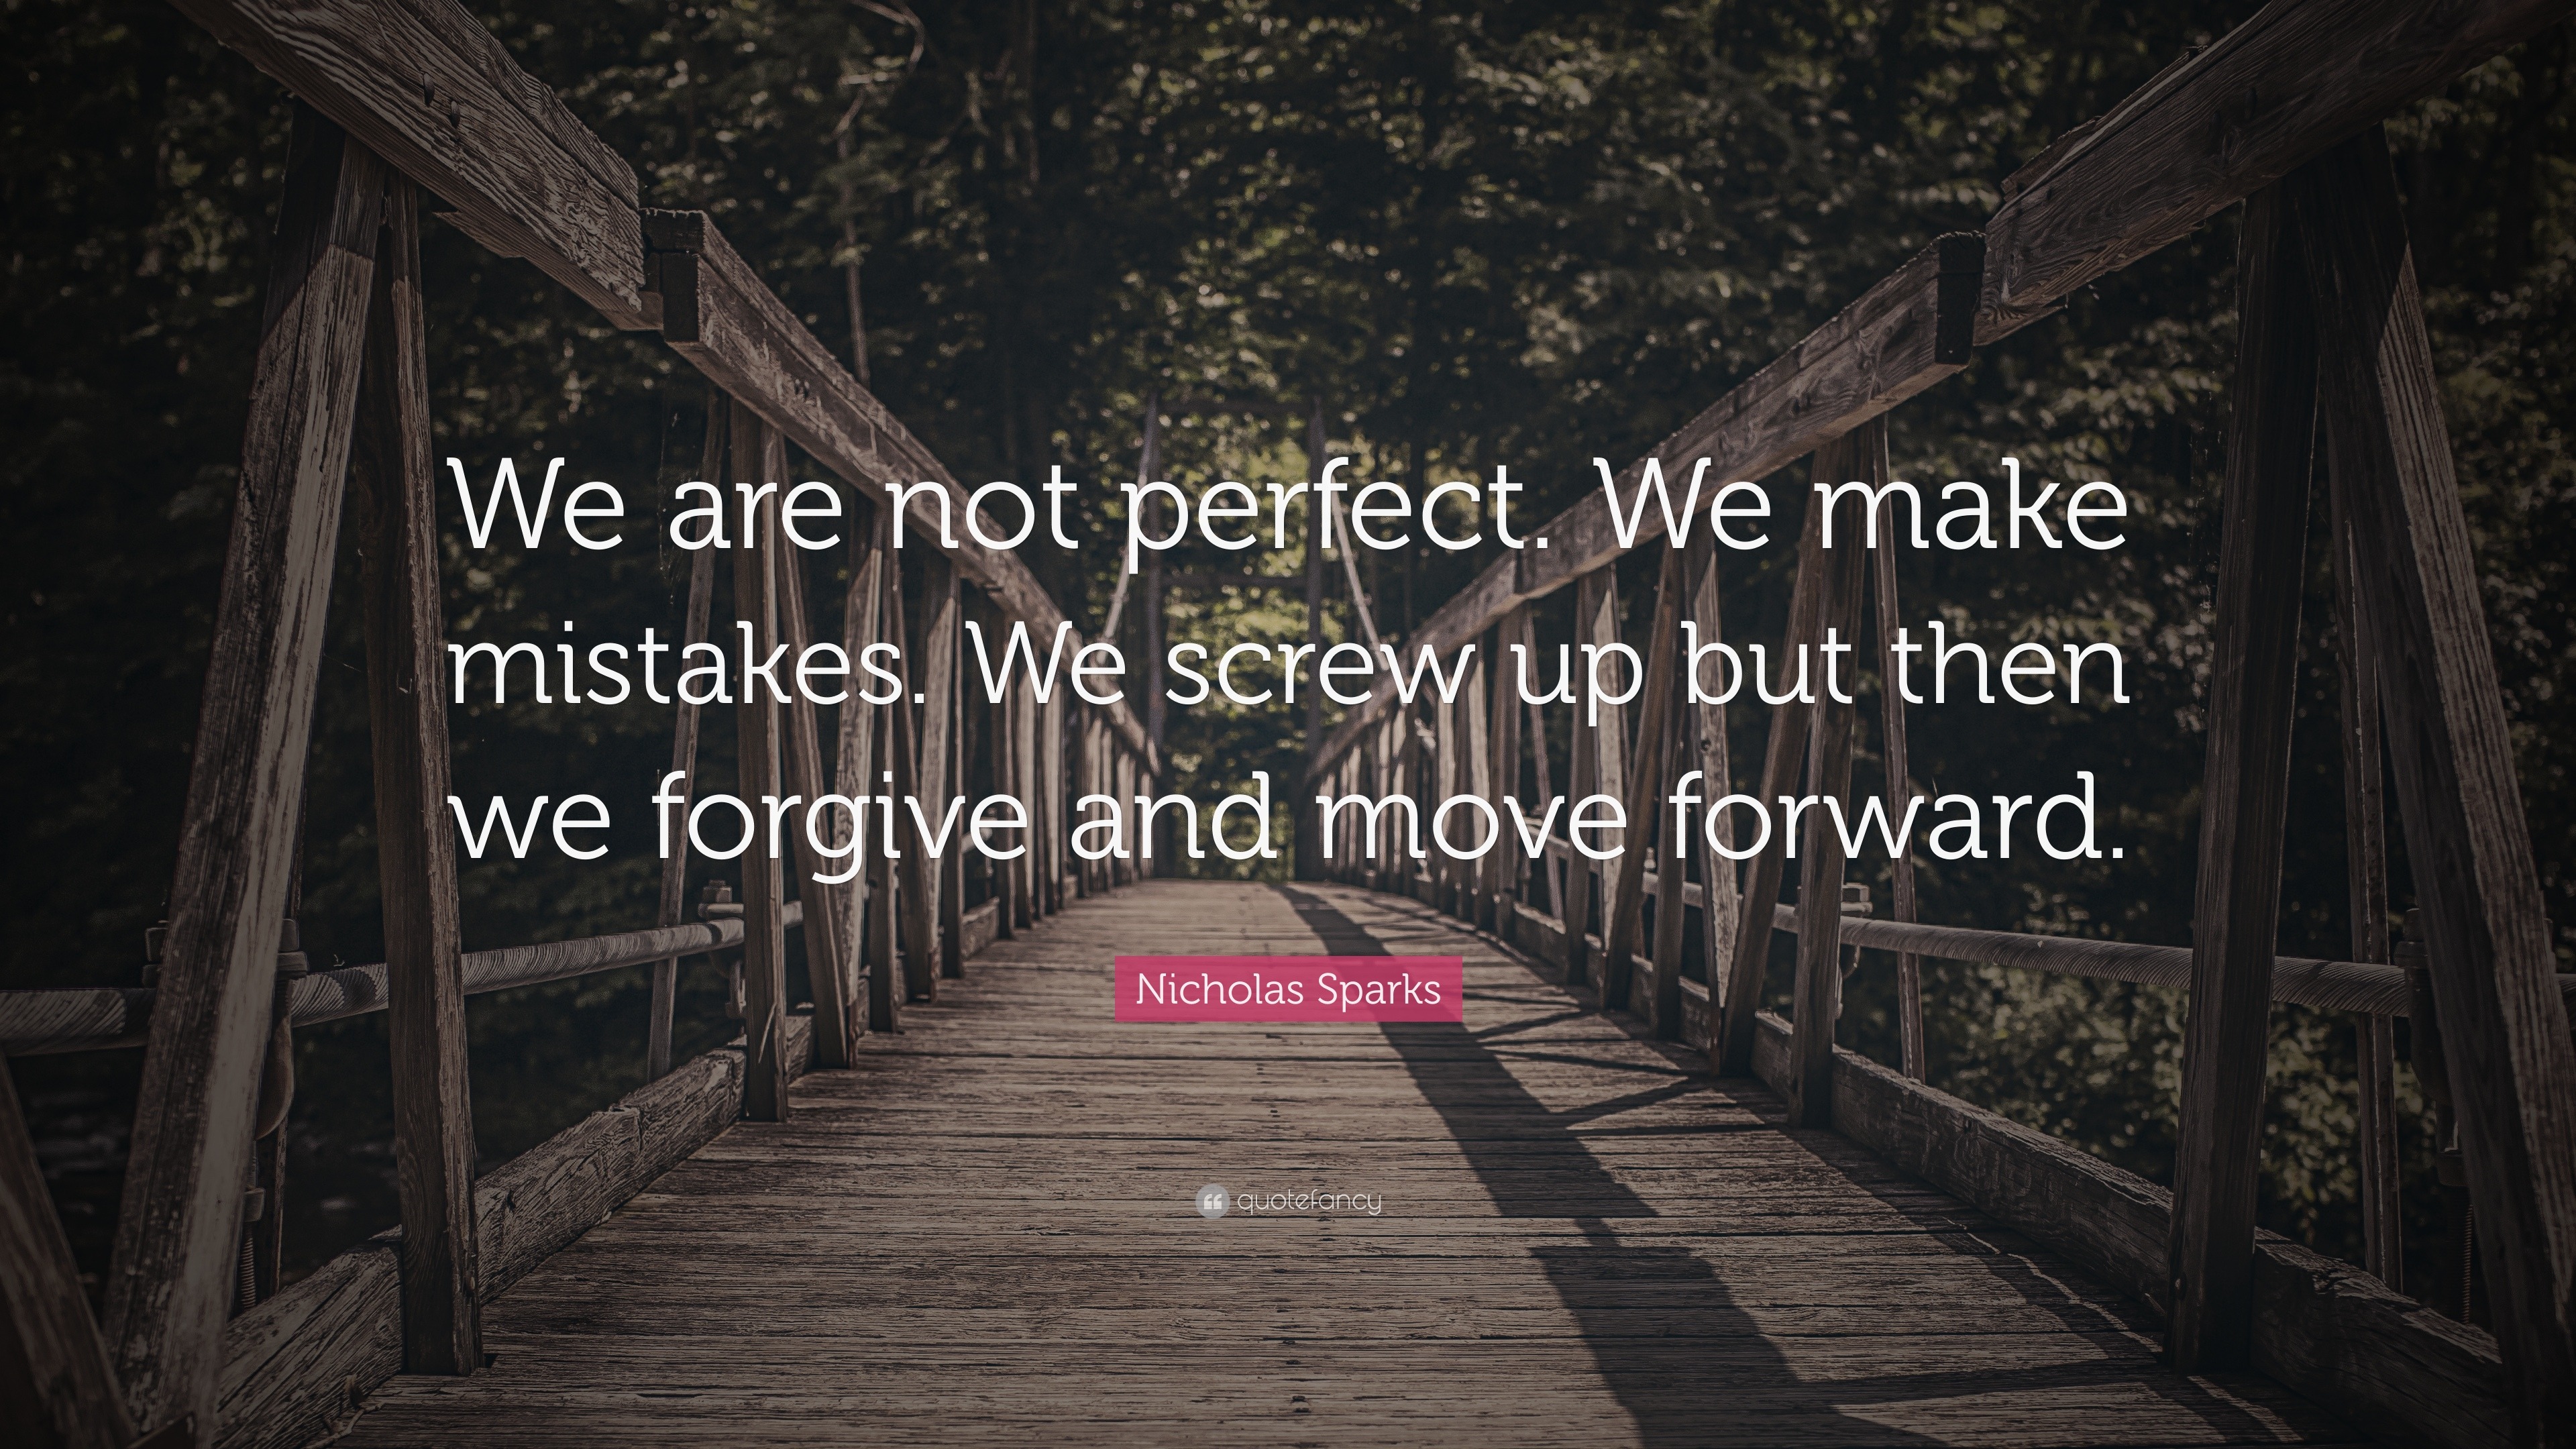 We are not perfect. We are sure we will make mistakes but we will make